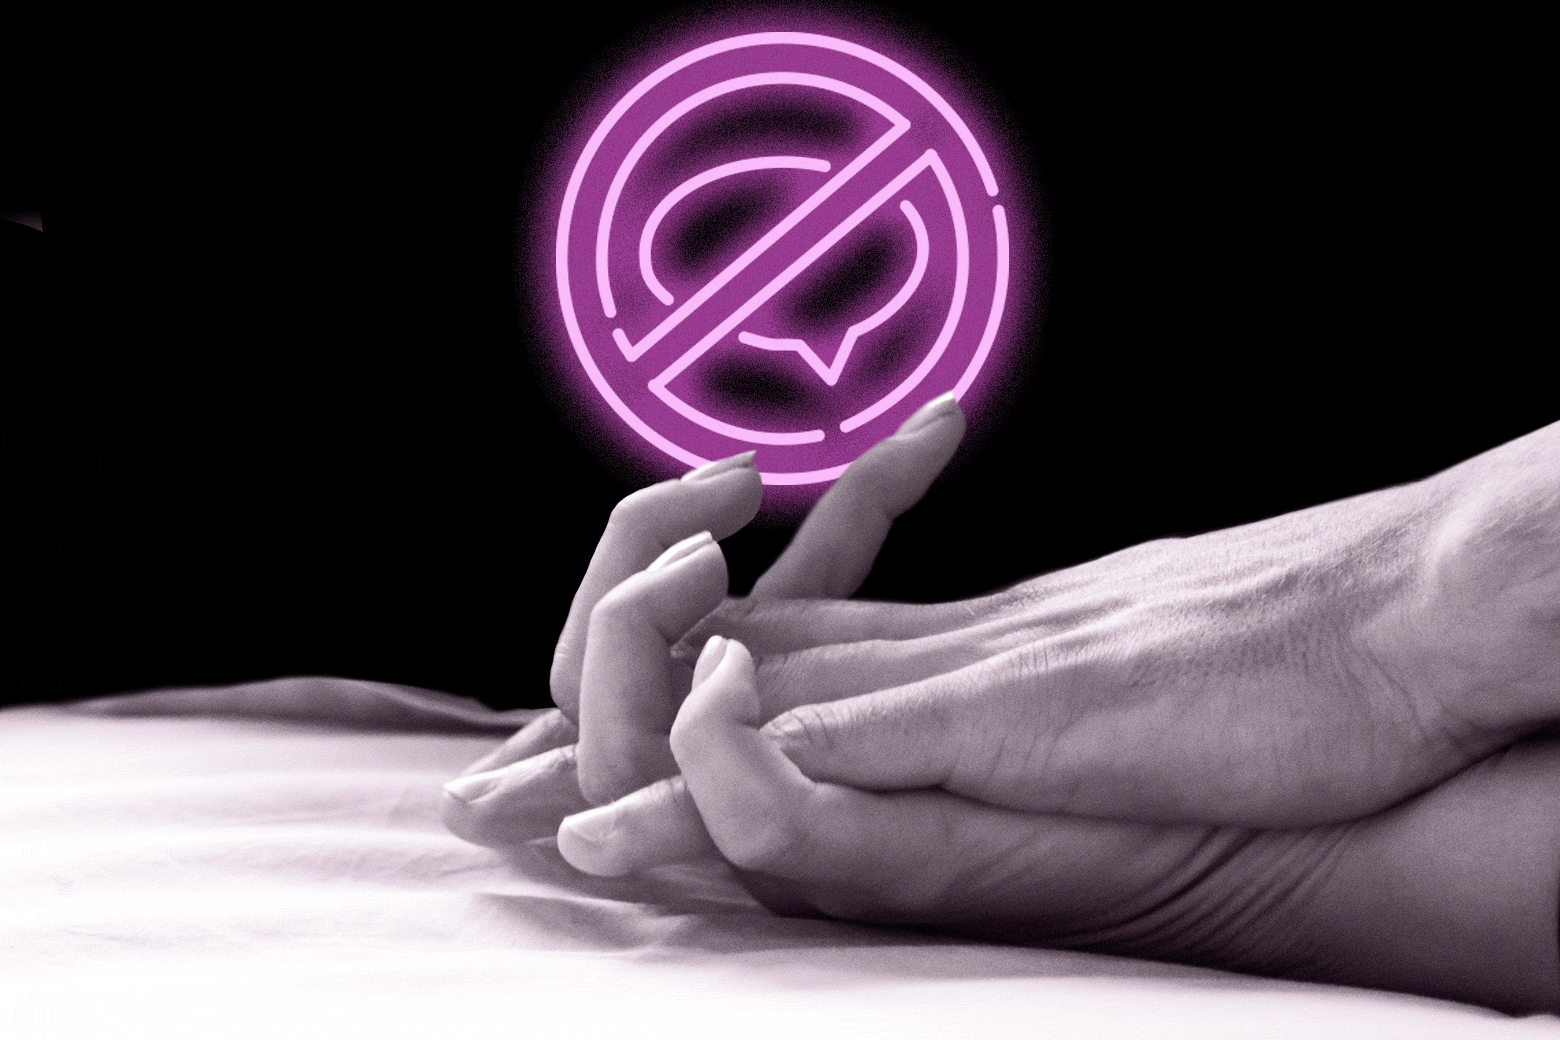 GIF of two people holding hands. A neon "No Talking" sign glows in the background.